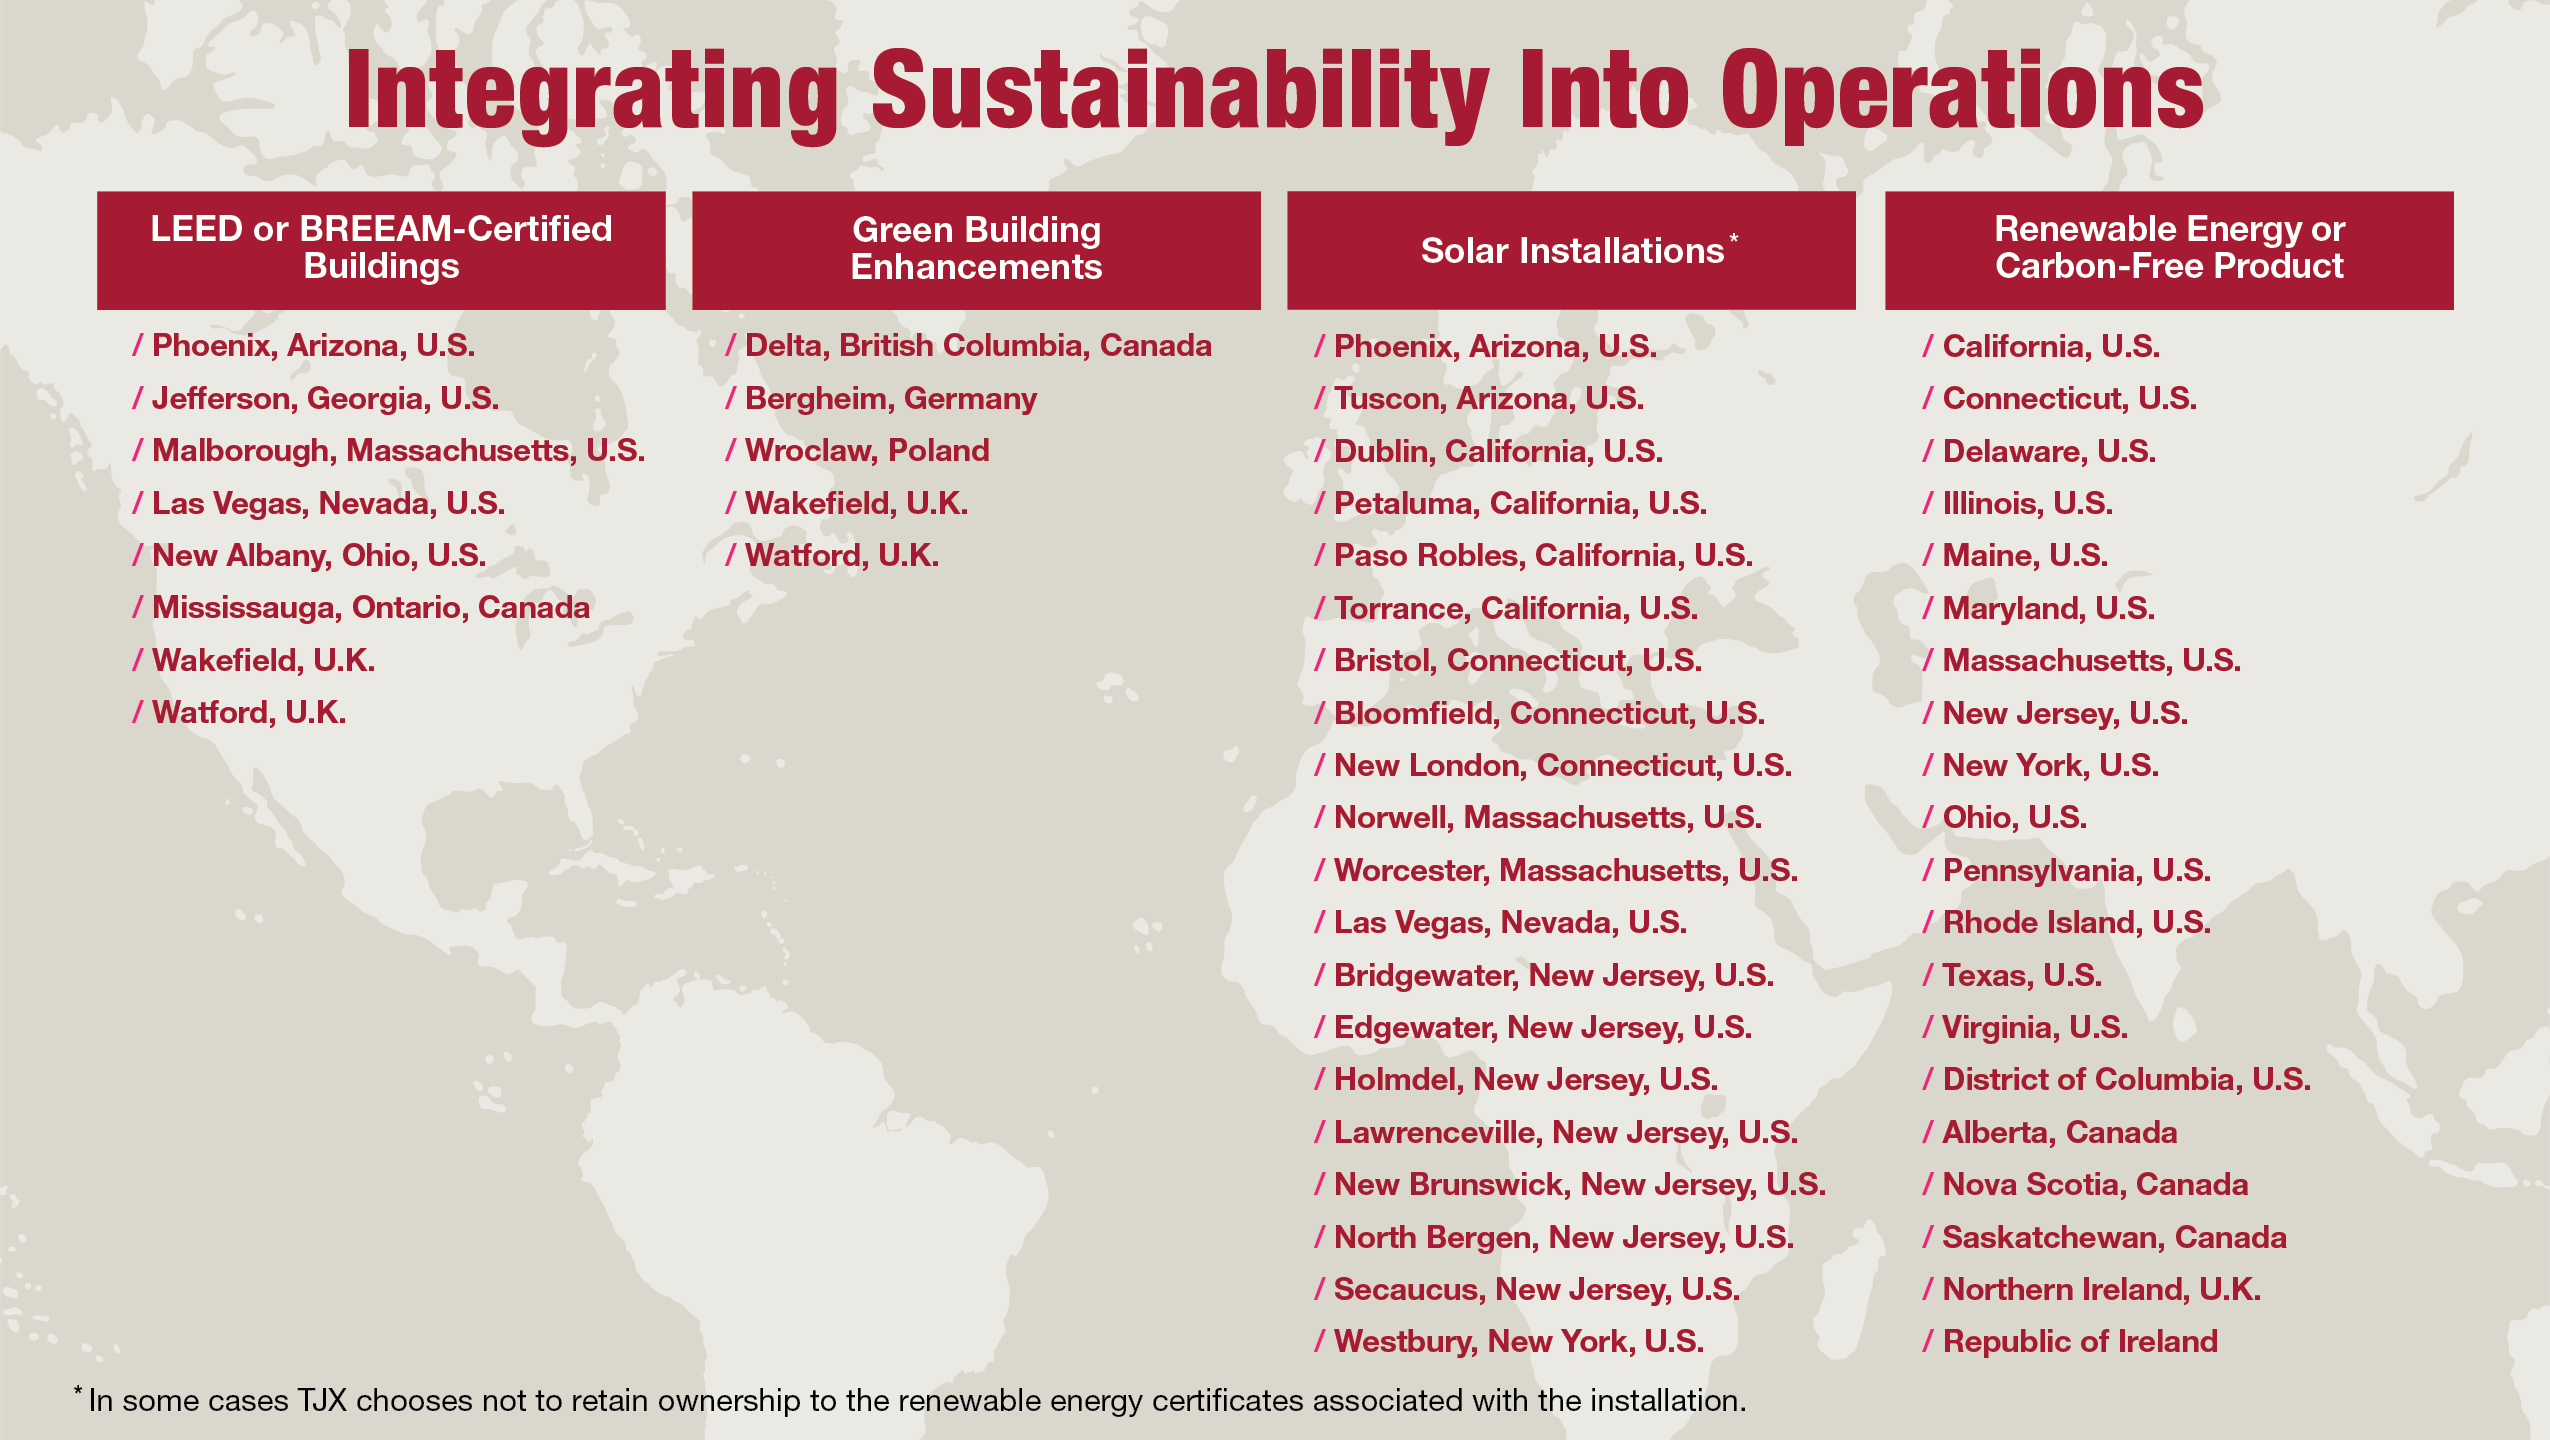 TJX integrating sustainability into global operations through LEED-Certified Buildings, Green Building Enhancements, Solar Installations, Renewable Energy or Carbon-Free Product